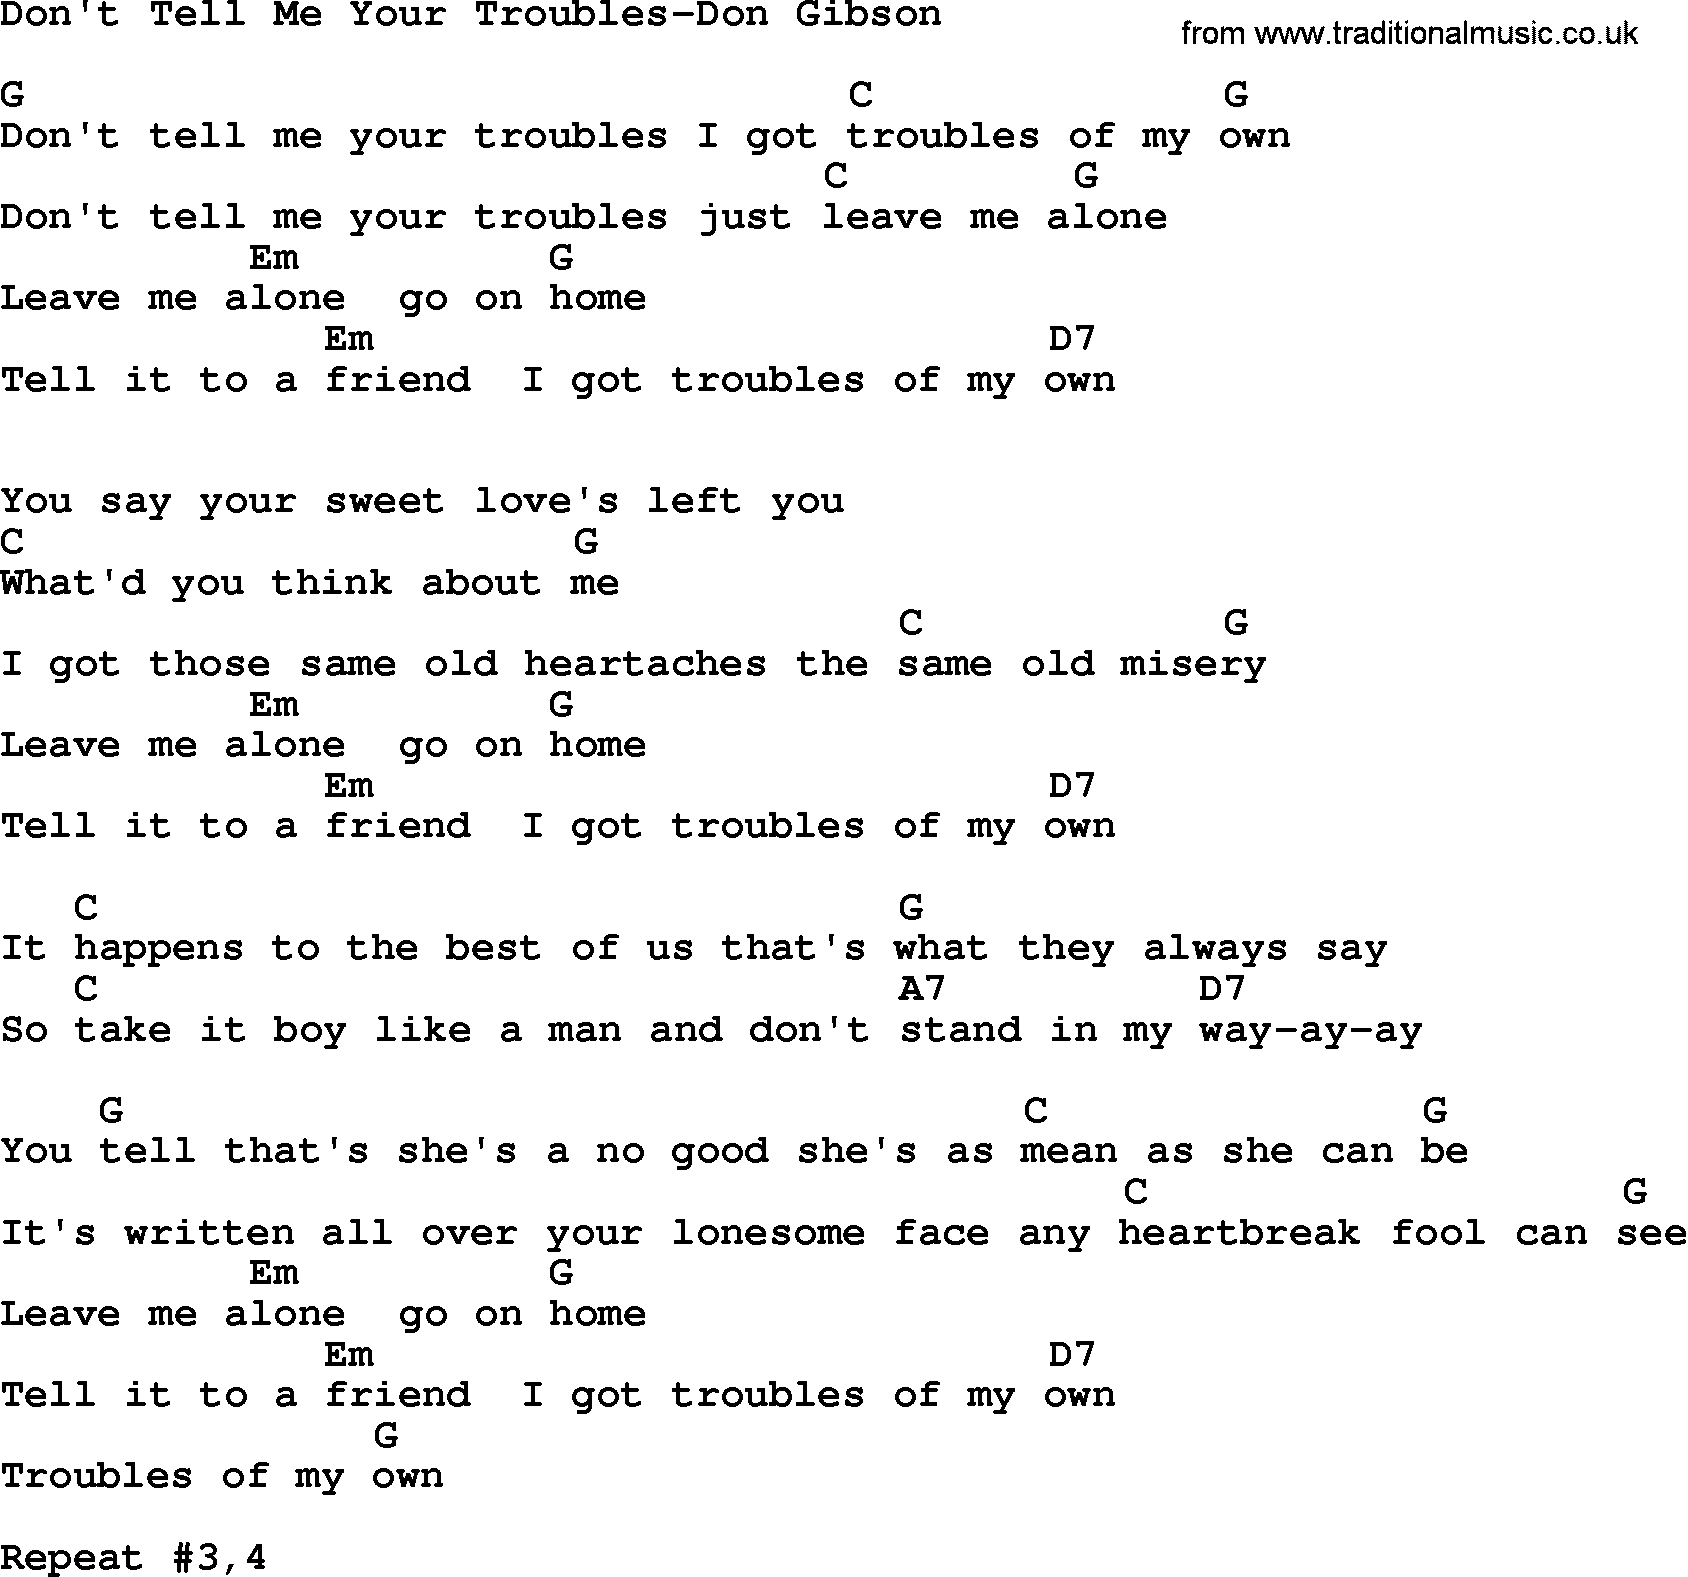 Country music song: Don't Tell Me Your Troubles-Don Gibson lyrics and chords